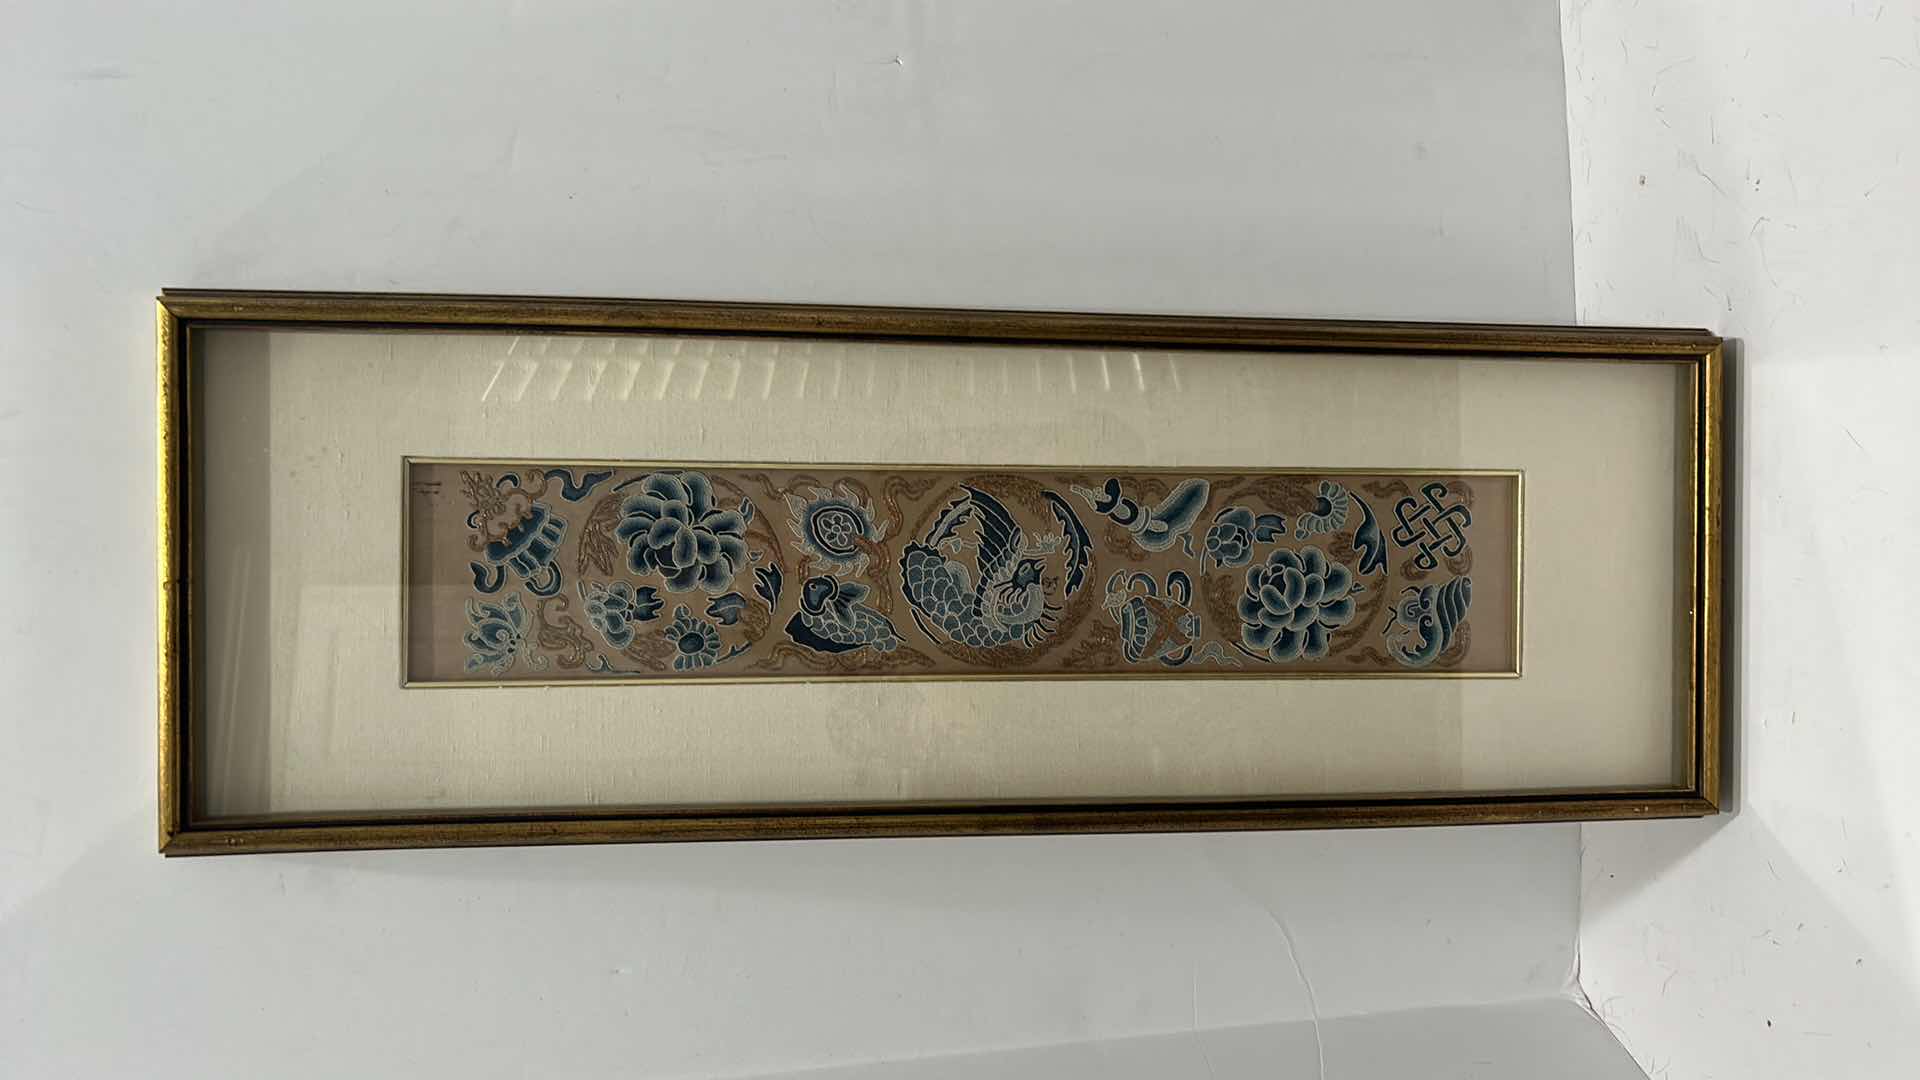 Photo 6 of SHADOW BOX WITH VINTAGE SILK TEXTILE FABRIC WITH SILK EMBROIDERY, ARTWORK 10 1/2” x 29”